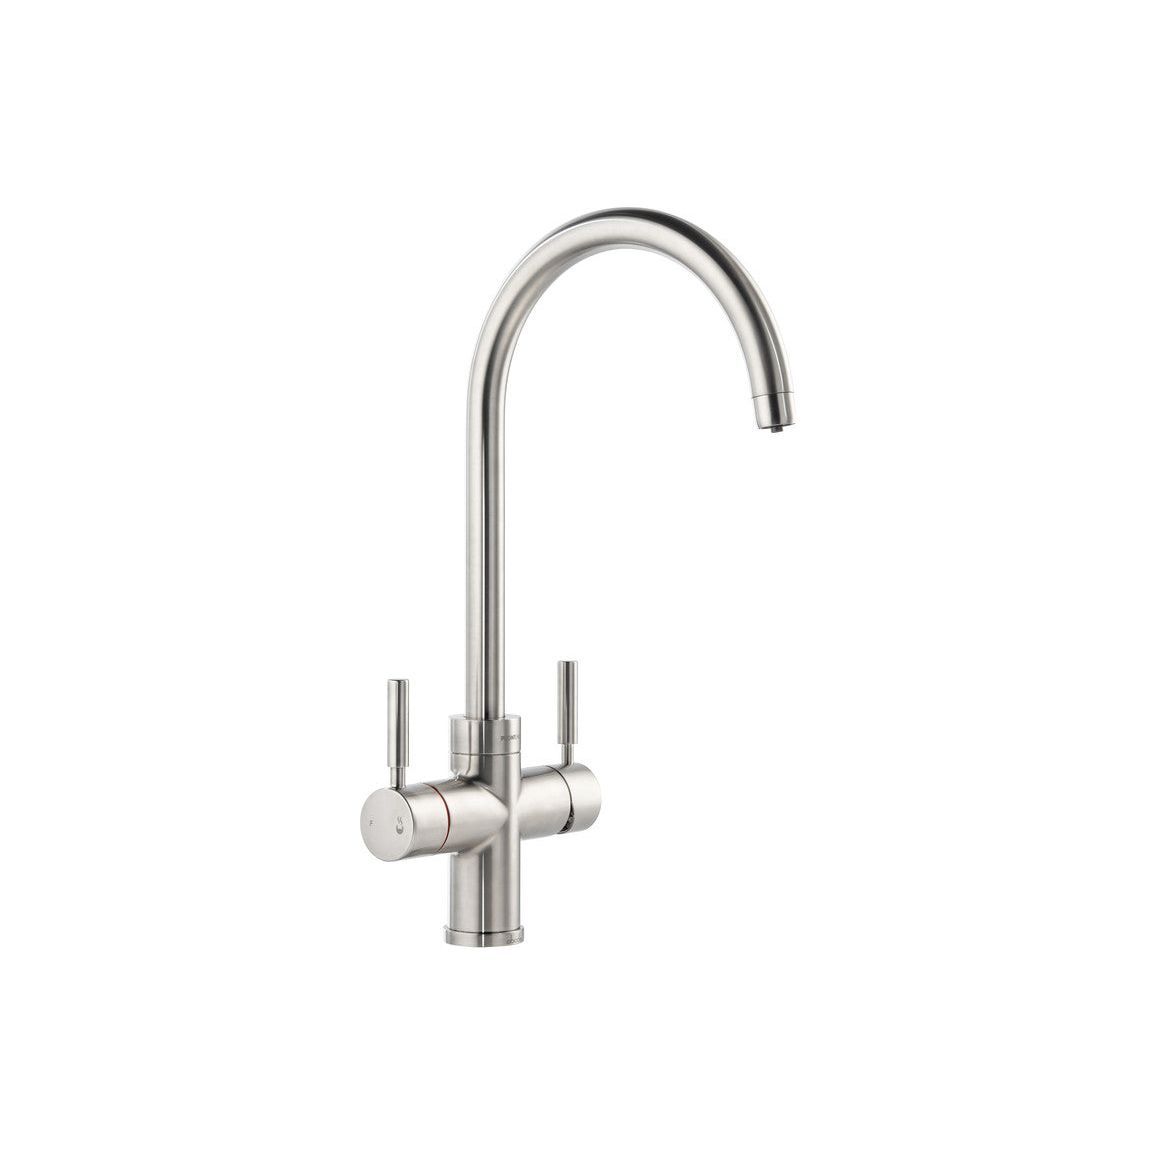 Abode Propure 4 IN 1 Swan Spout Monobloc Tap - Brushed Nickel